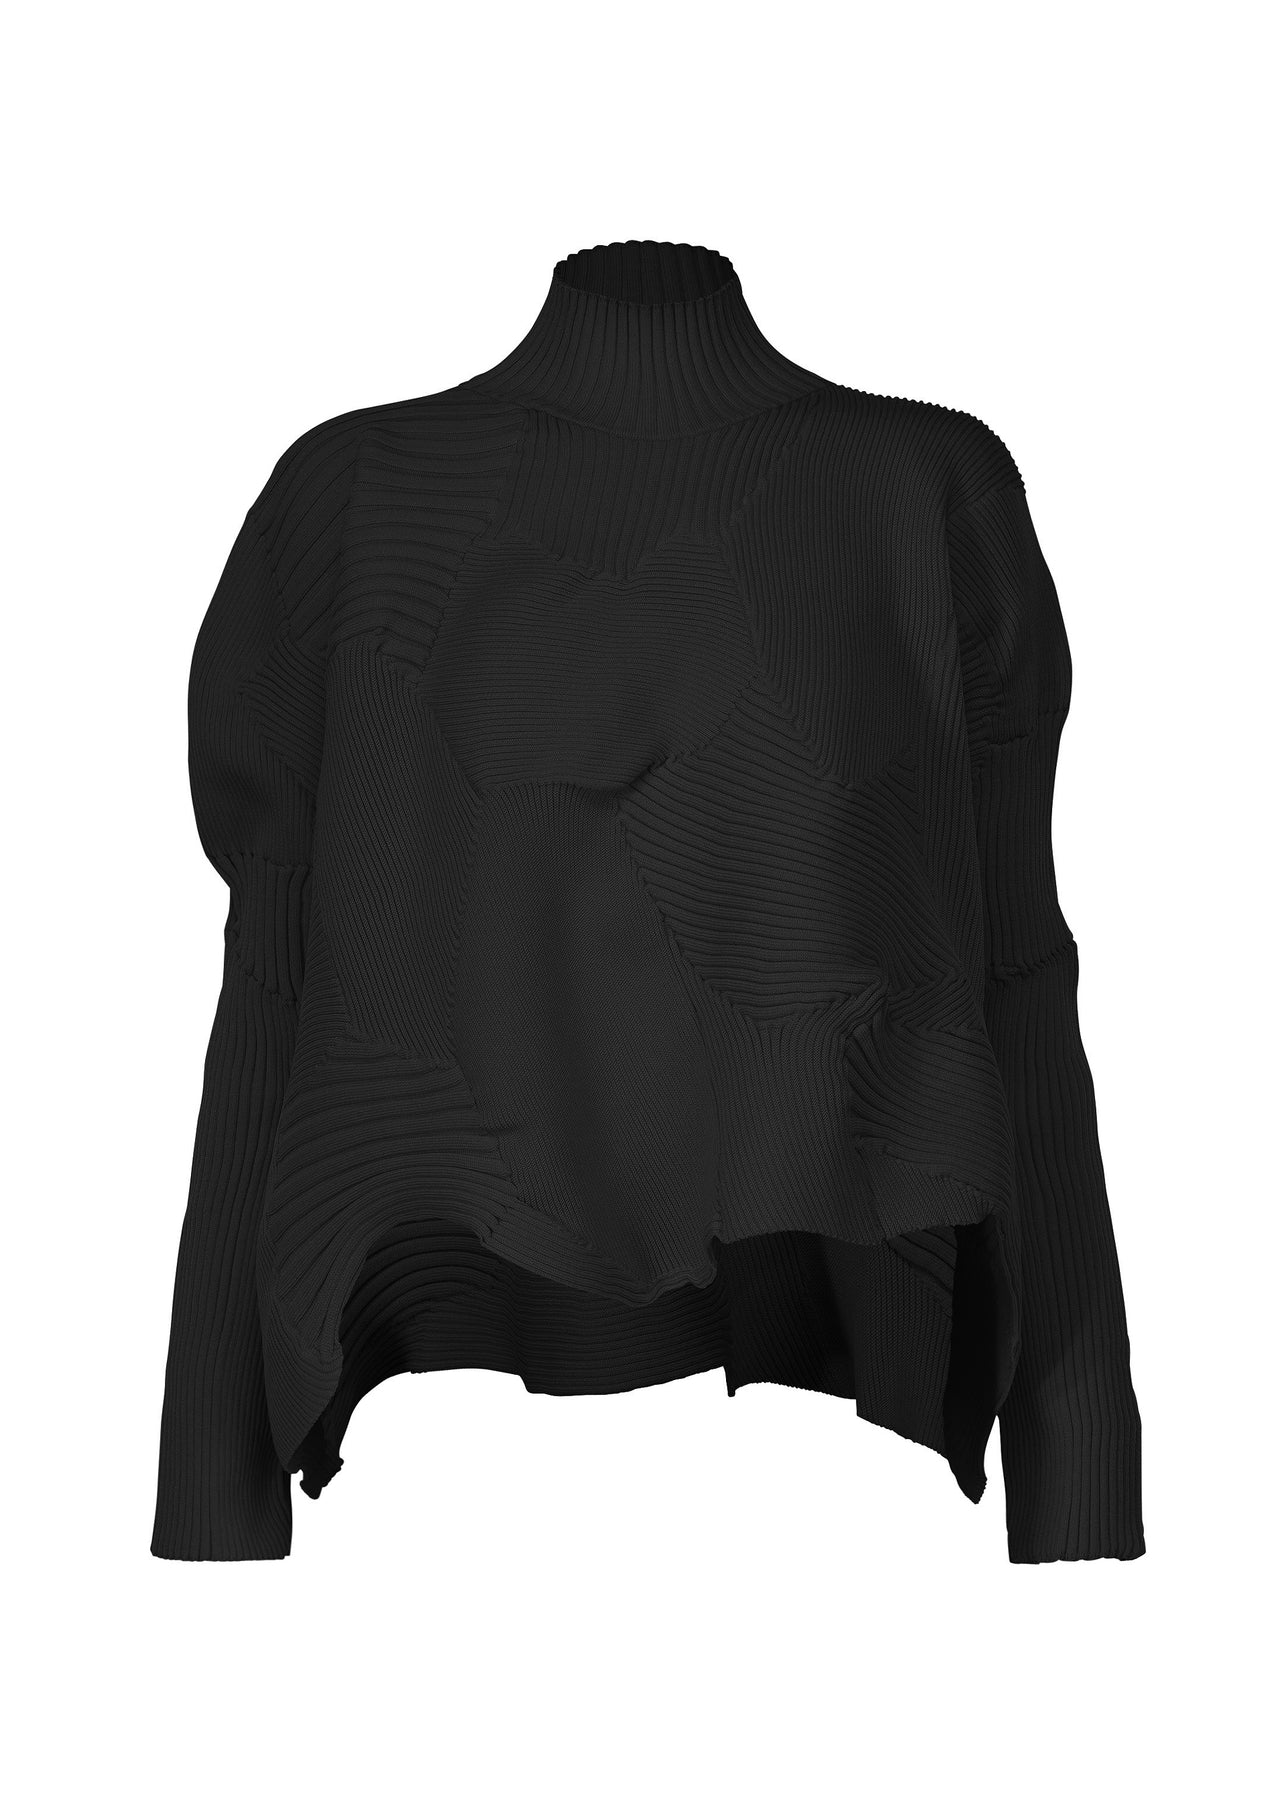 KONE KONE TOP | The official ISSEY MIYAKE ONLINE STORE | ISSEY